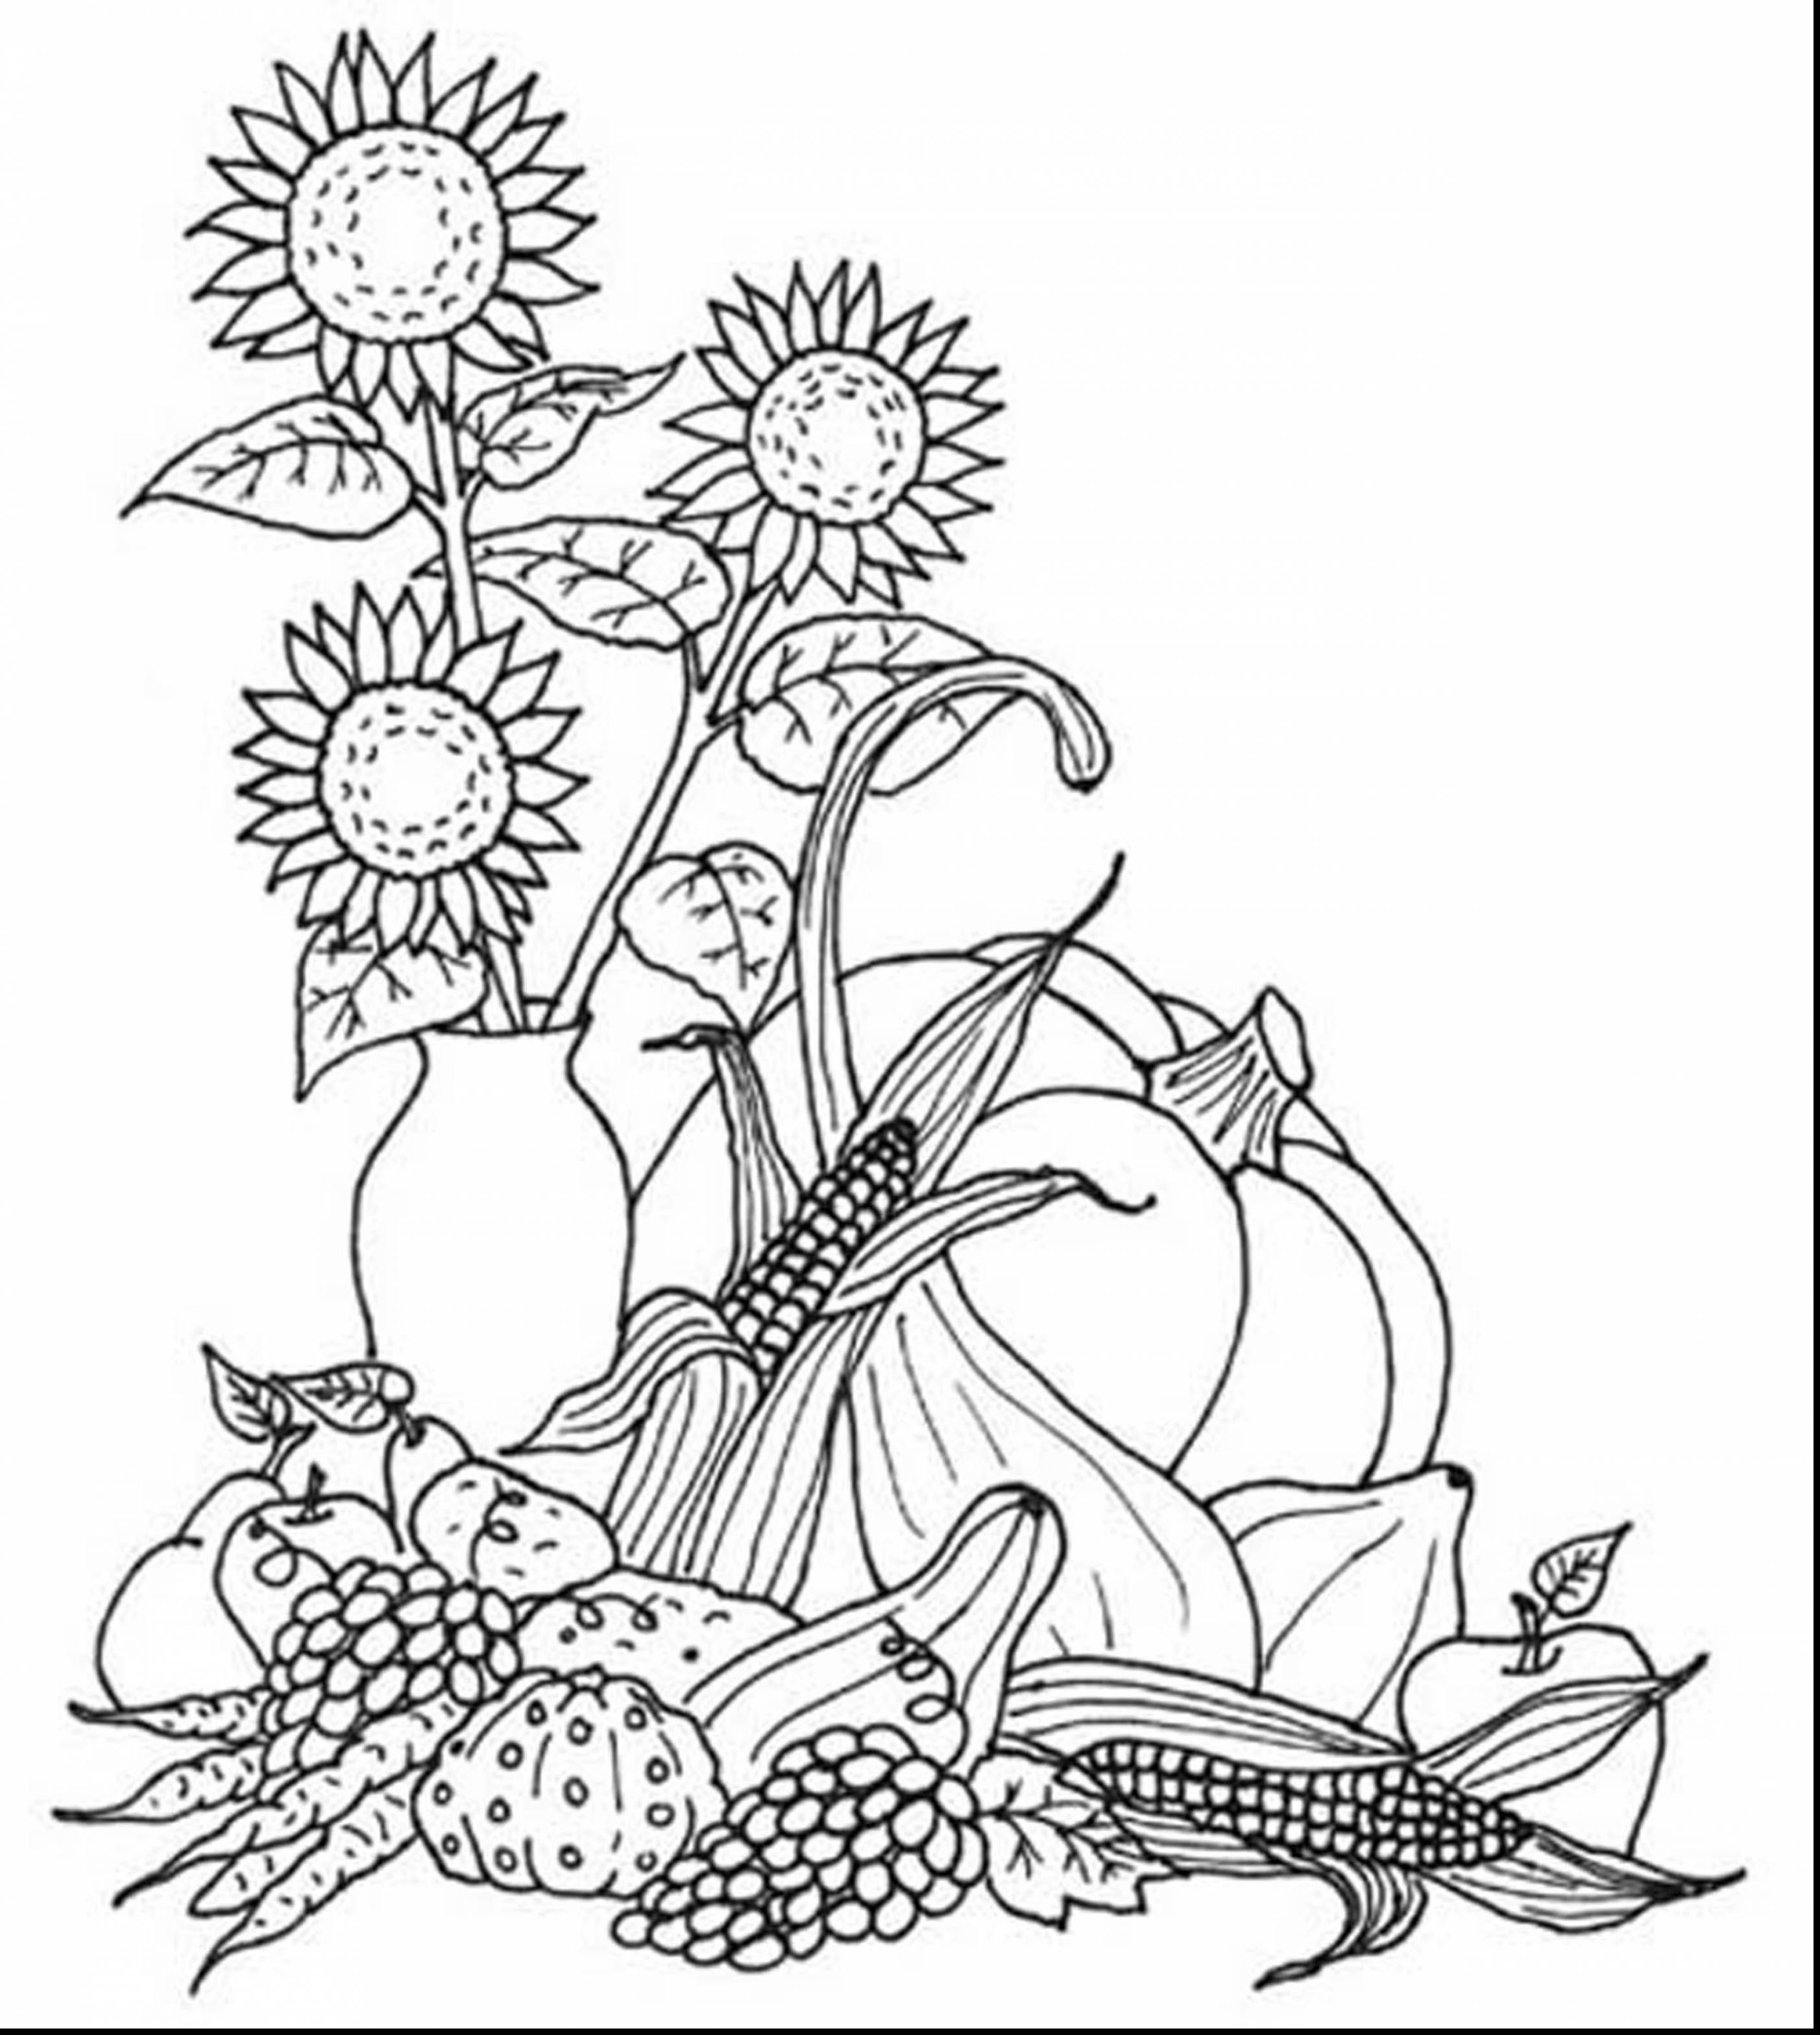 Free Fall Coloring Sheets
 Harvest Coloring Pages Printables